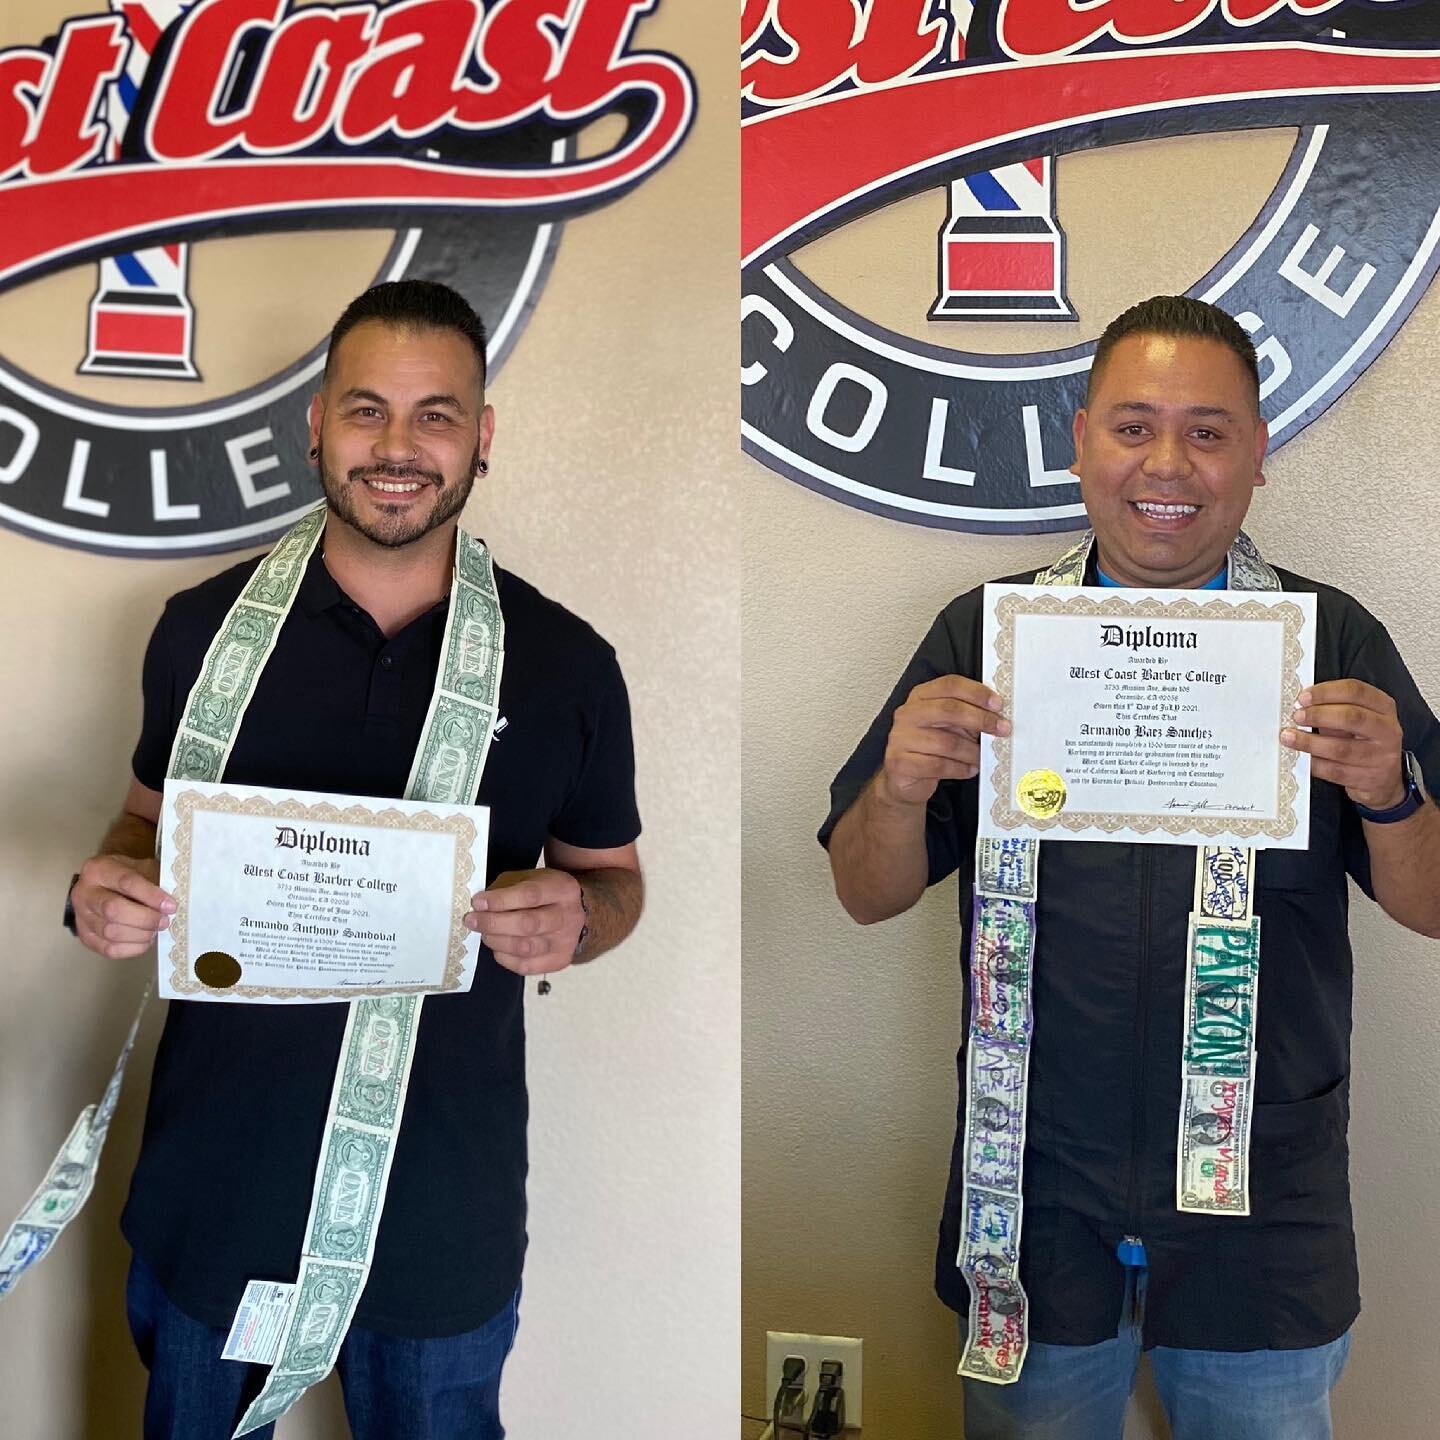 Congratulations to both Armando&rsquo;s @mando_cutz @baez.fades on their completion of barber college. 1500 hours is official done! Next up is state board to get licensed. Wish you both the best with your new careers!! #westcoastbarbercollege #barber